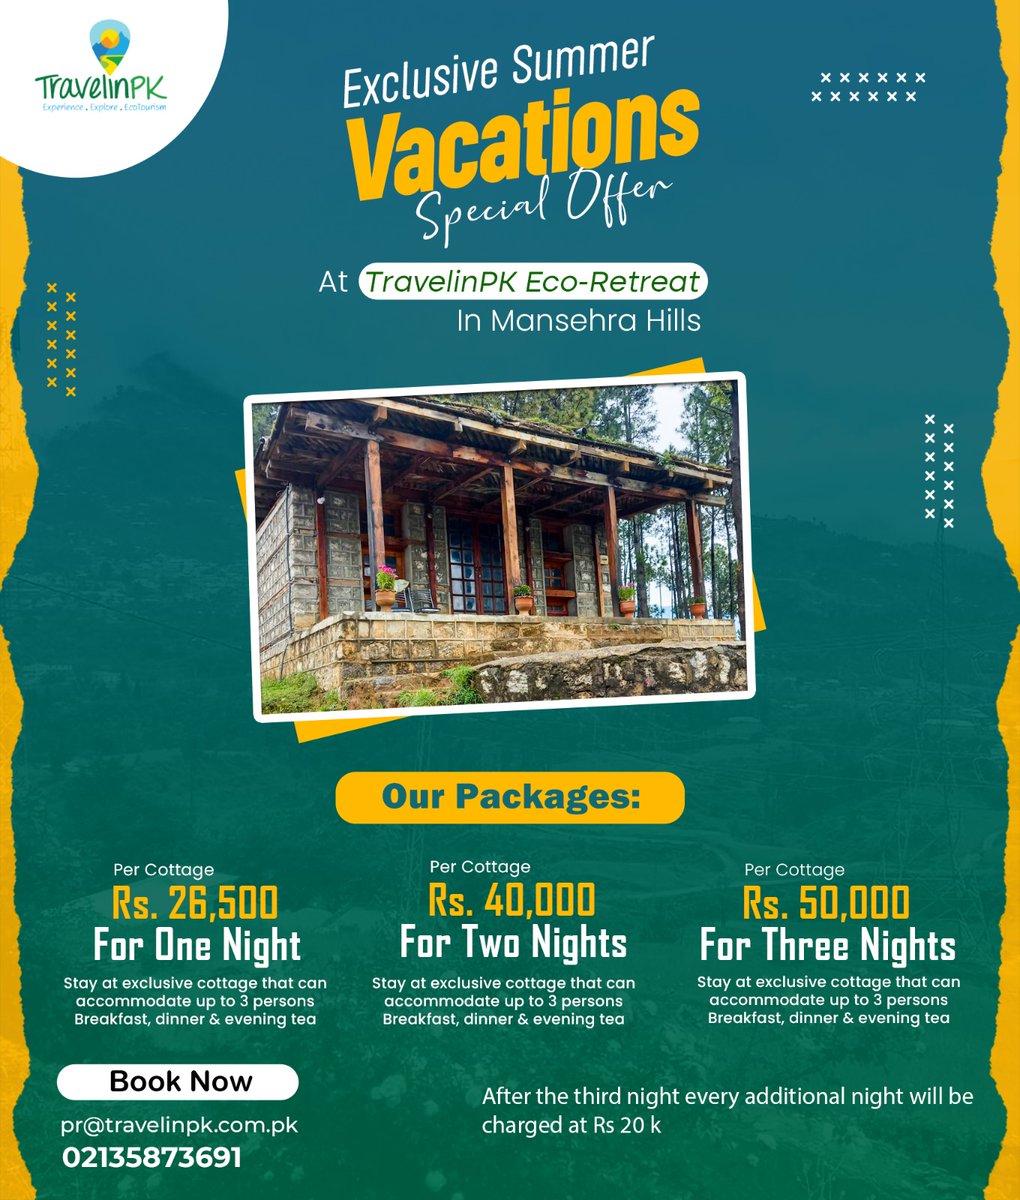 Unwind in the lap of nature with Travelinpk Eco-Retreat in Mansehra.

Book Now✍
Contact: +92 334 3989335
Email: info@travelinpk.com.pk

#booknow #exclusivesummervacations #ecoretreat #vacationpackages #travelphotography #traveladdict #travelingram #travelinstyle #travelinpk